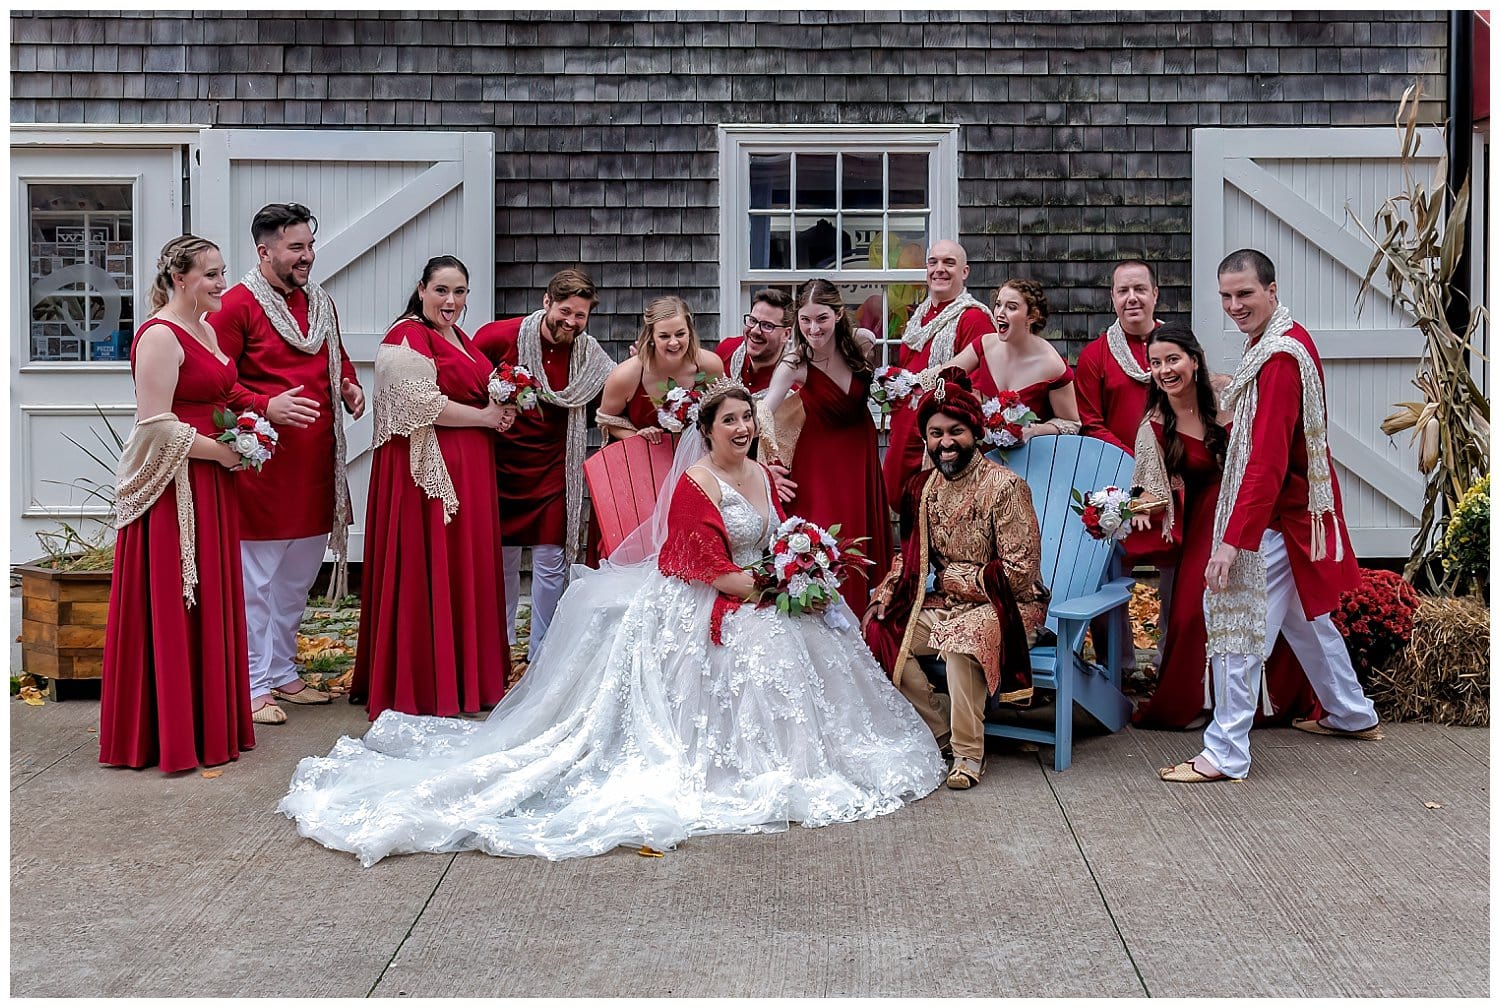 The wedding party poses for fun in the Halifax Historic Properties.